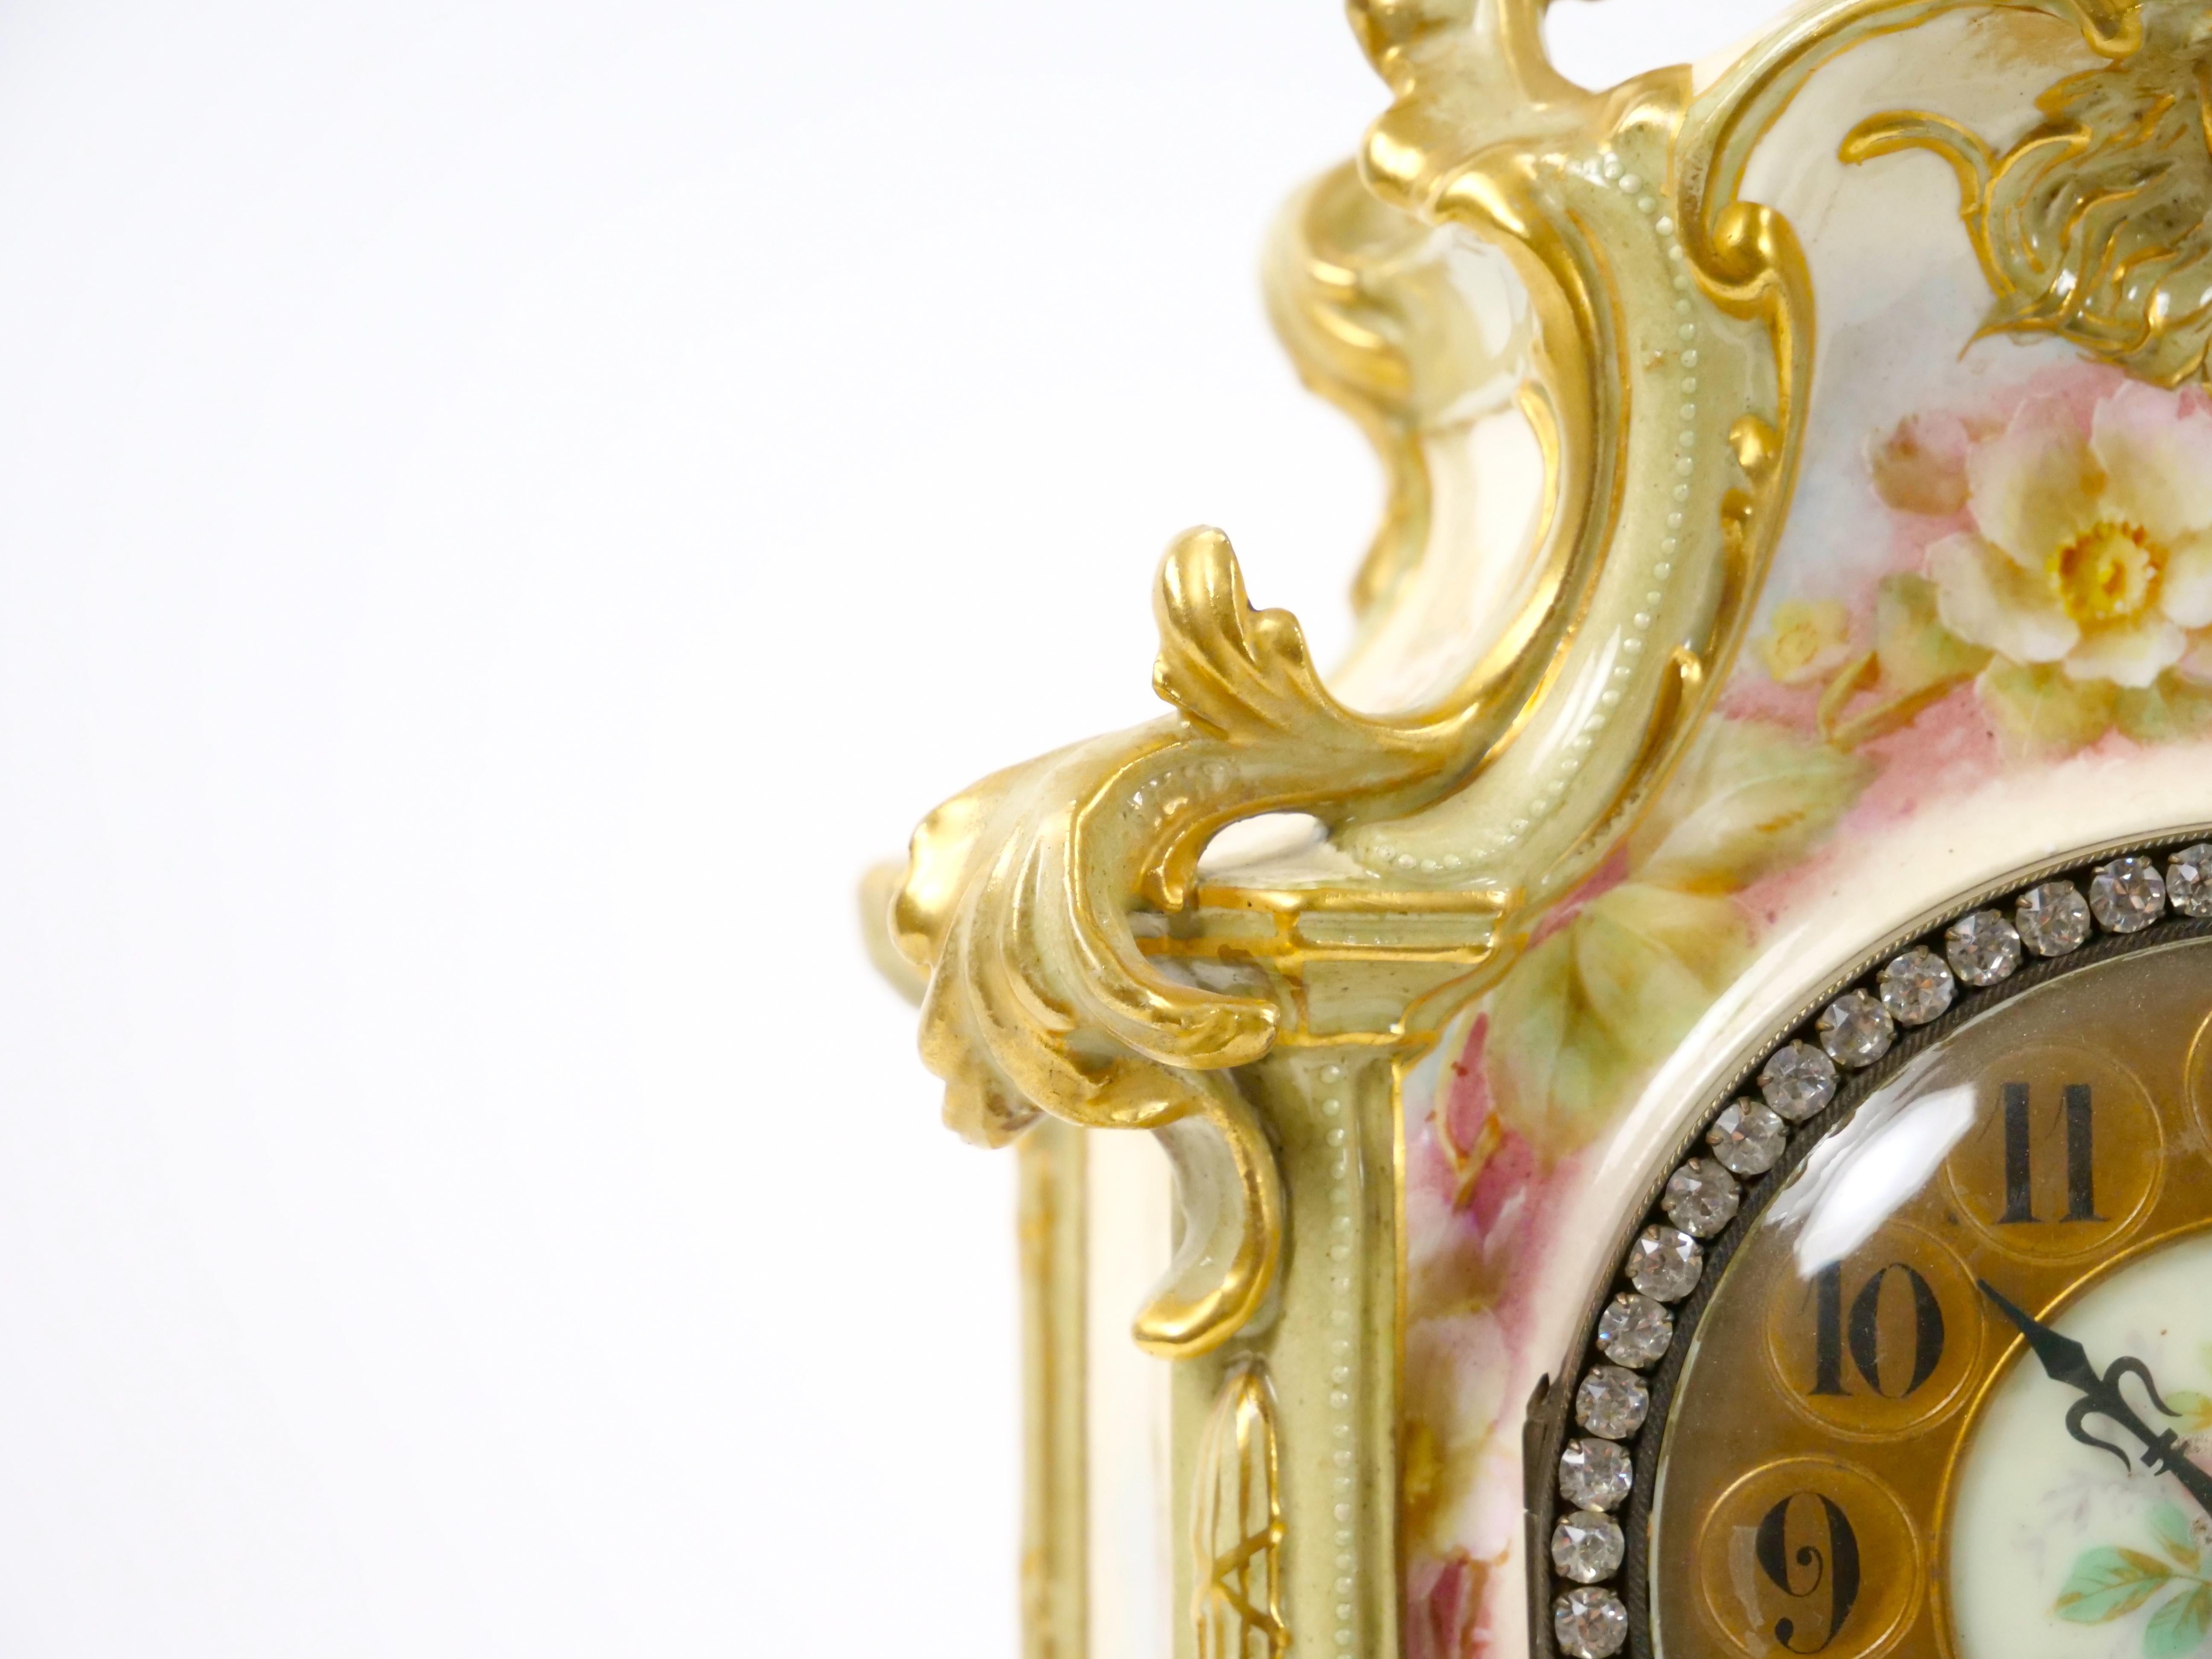 Early 19th Century 19th Century French Hand Painted/Gilt Decorated Porcelain Mantel Clock